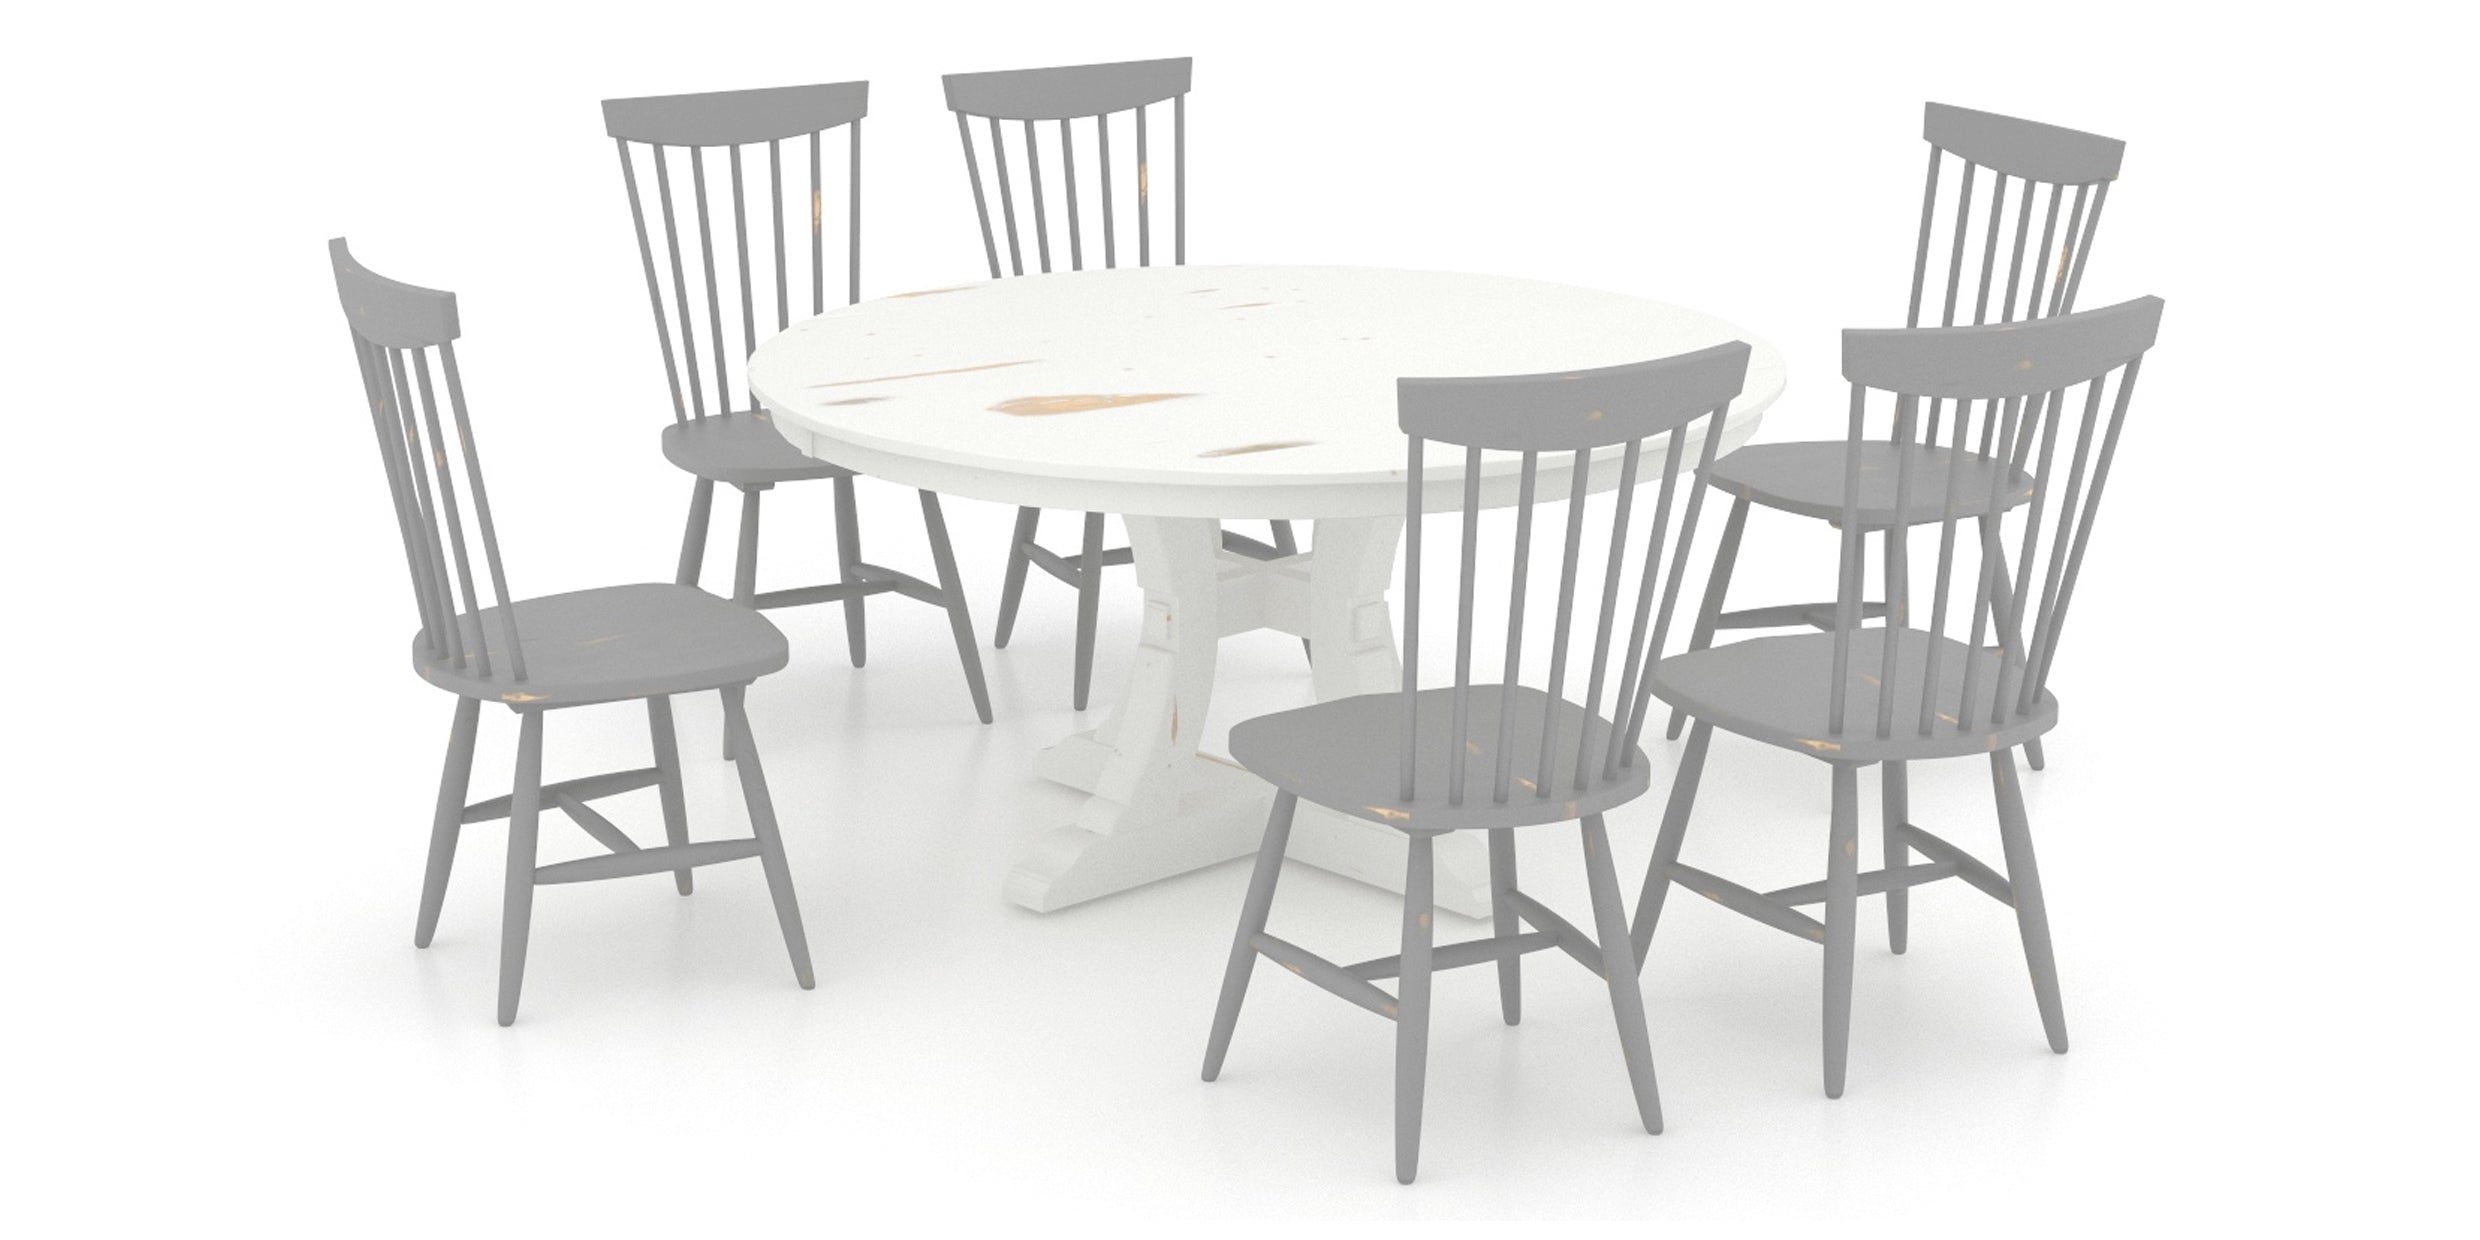 Dove White Birch and Steel Grey Birch with Distressed Finish | Canadel Champlain 5454 Dining Set | Valley Ridge Furniture